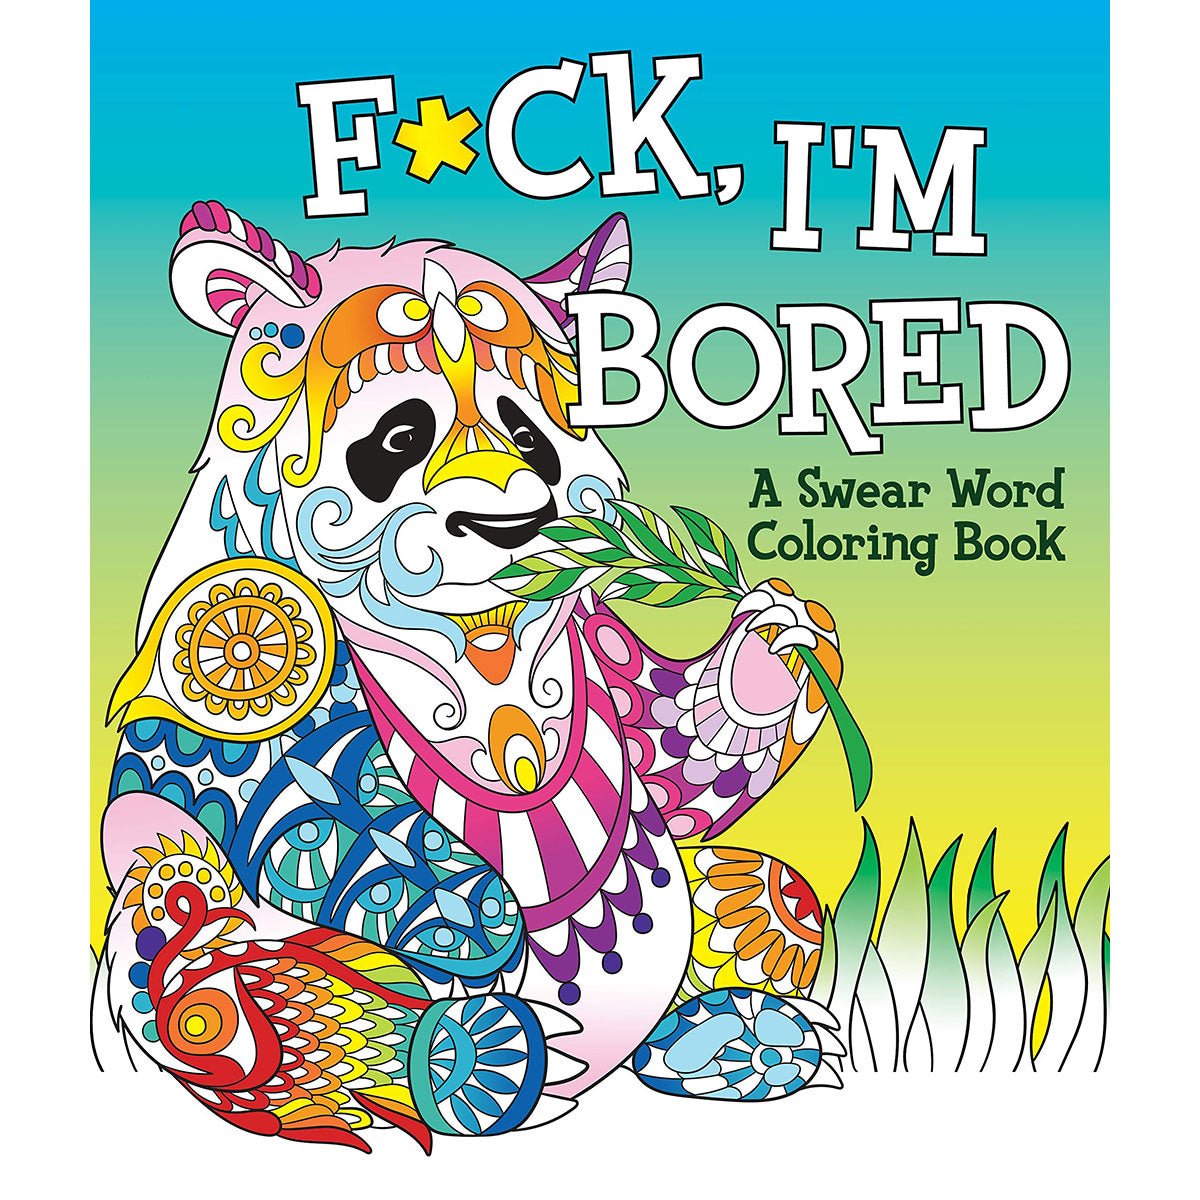 Fuck, I'm Bored: A Swear Word Coloring Book - Kink Store